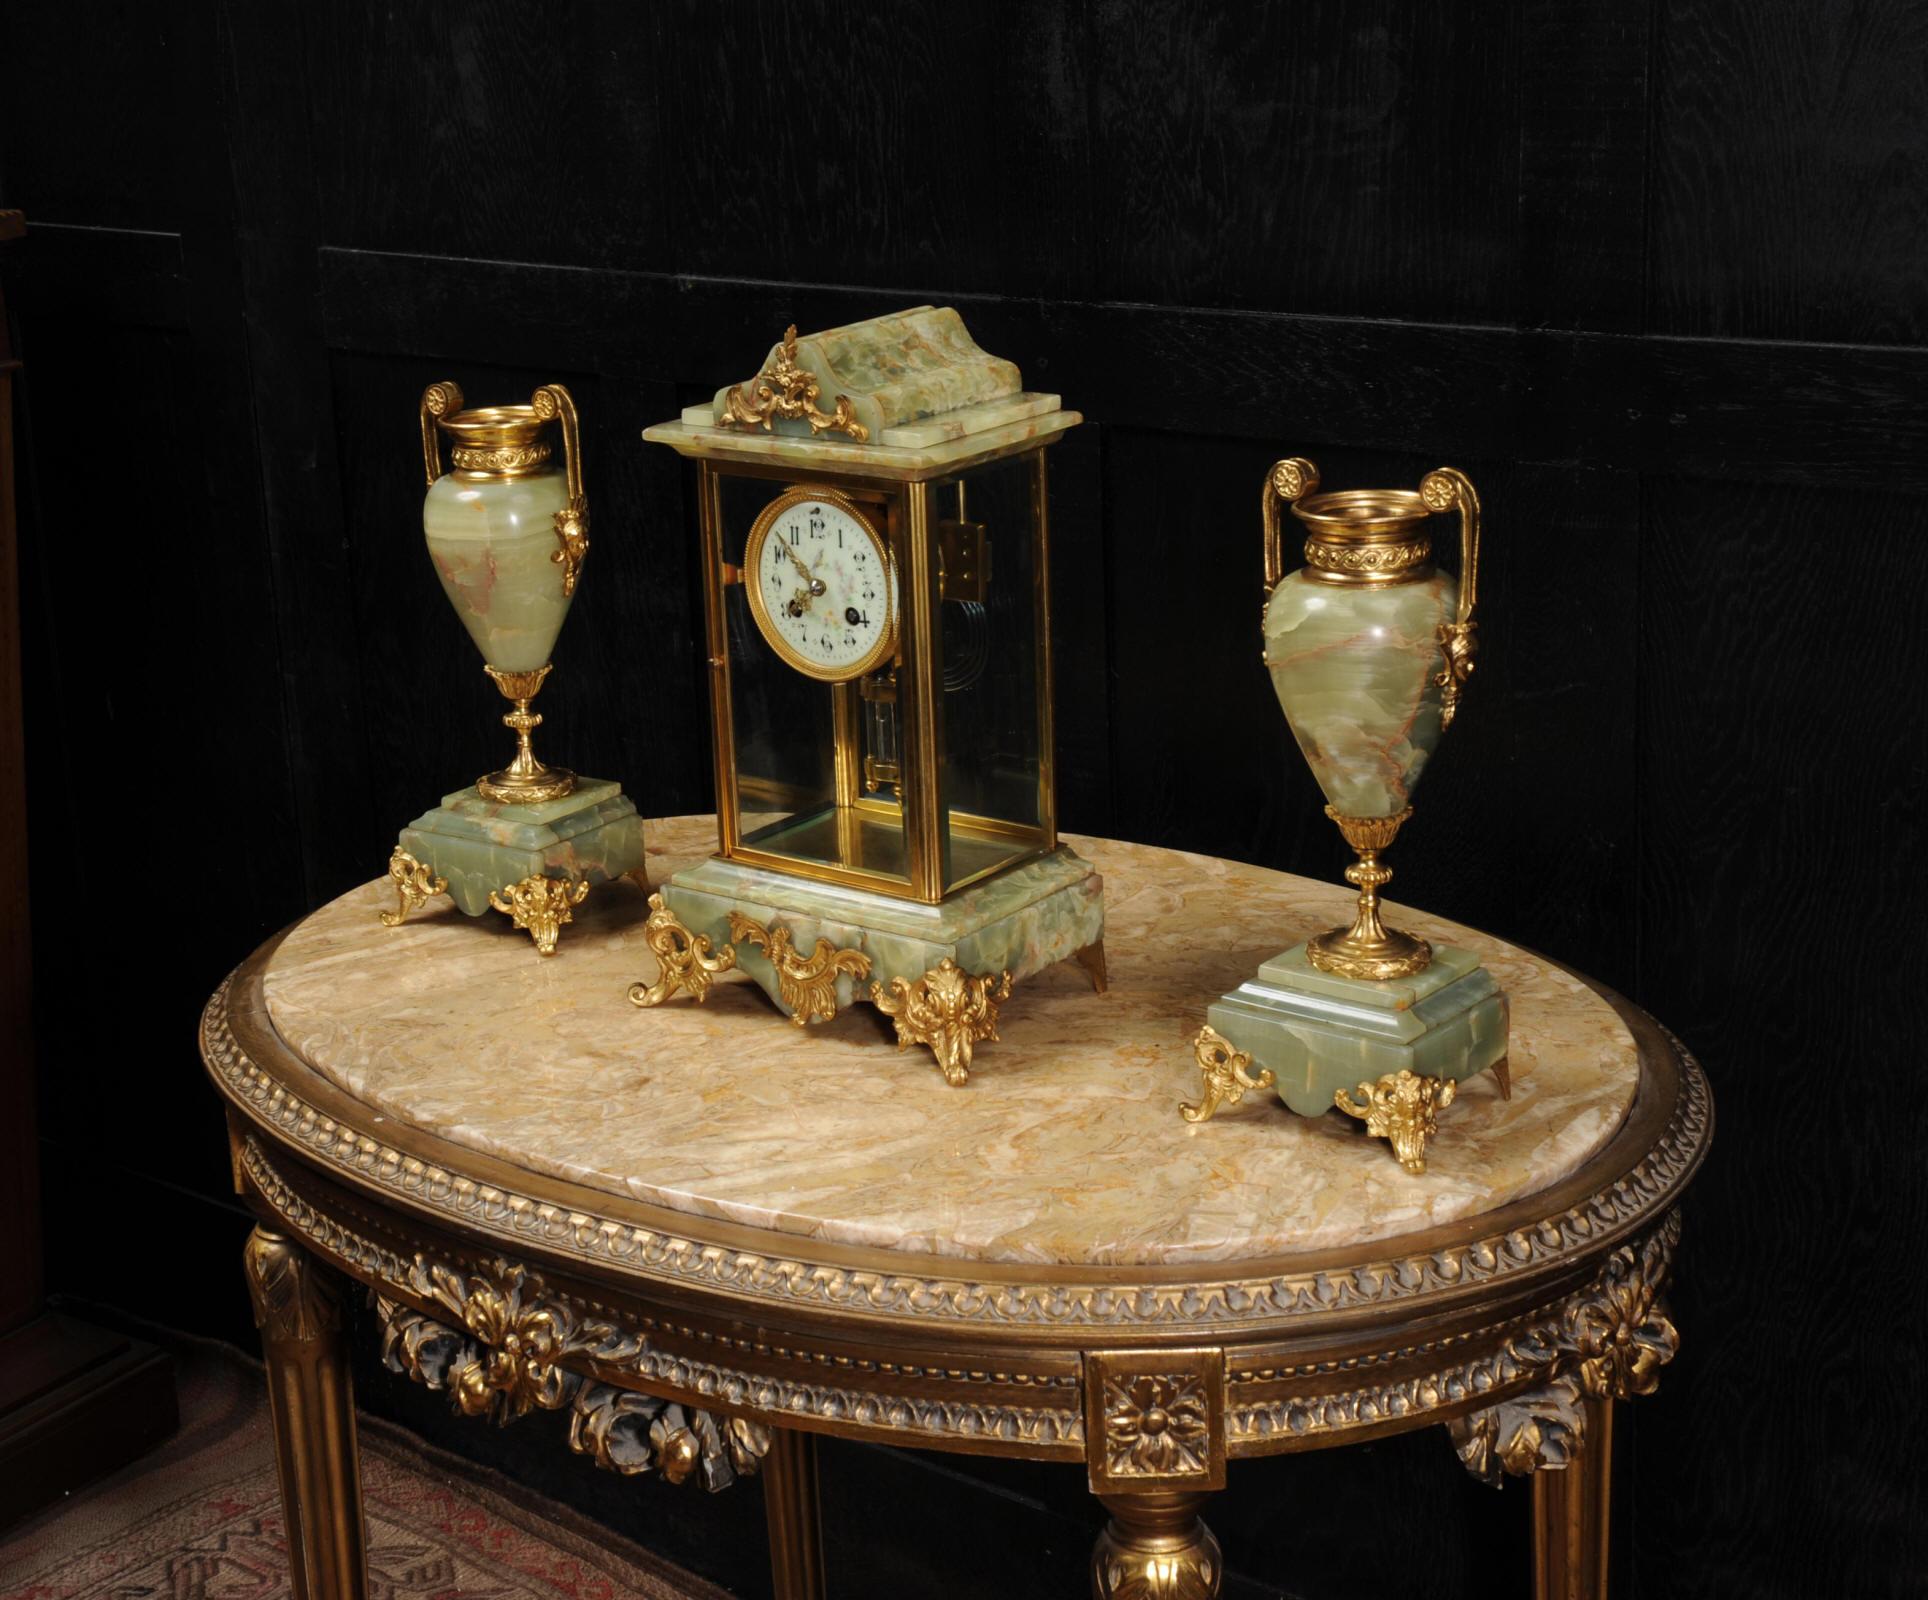 Antique French Four Glass Crystal Regulator Clock Set in Onyx and Ormolu (Neoklassisch)